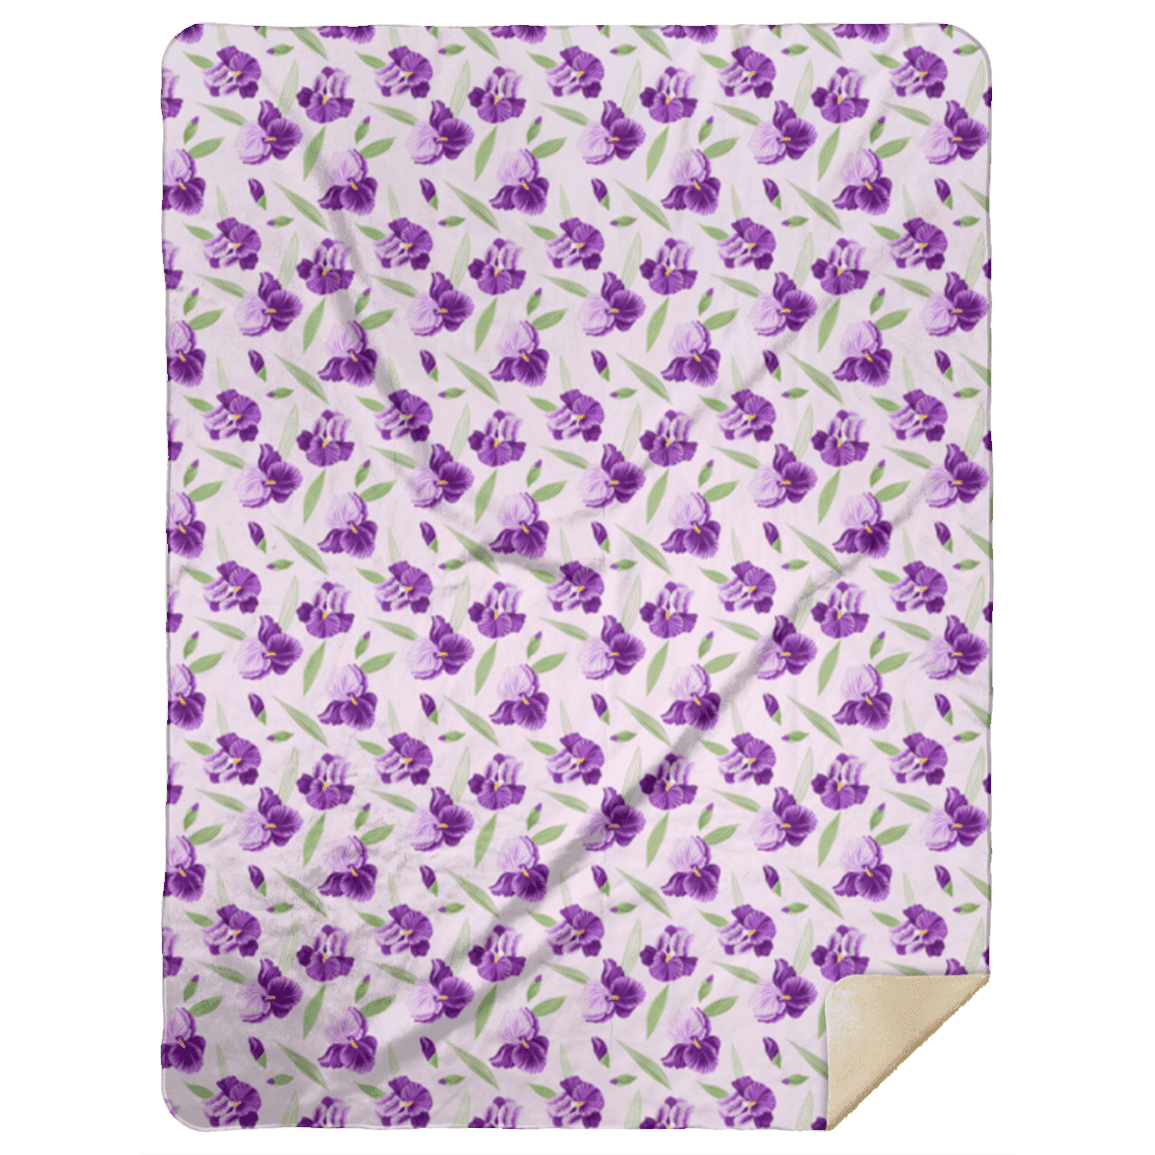 Colorful plush throw blanket with a vibrant iris flower pattern, measuring 60x80 inches, by Little Hometown.